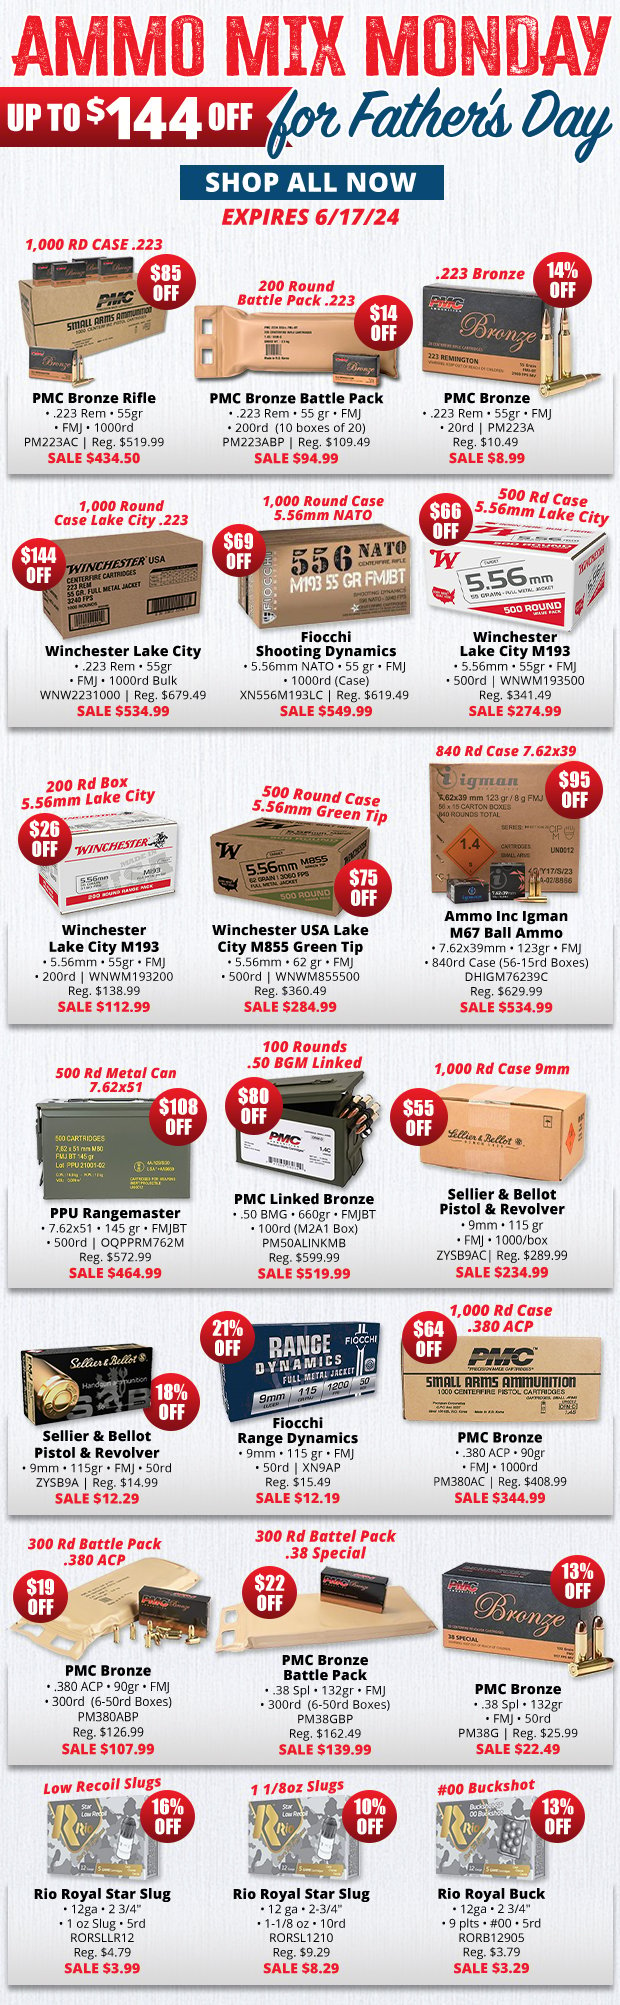 Up to $144 Off on Ammo Mix Monday for Father's Day